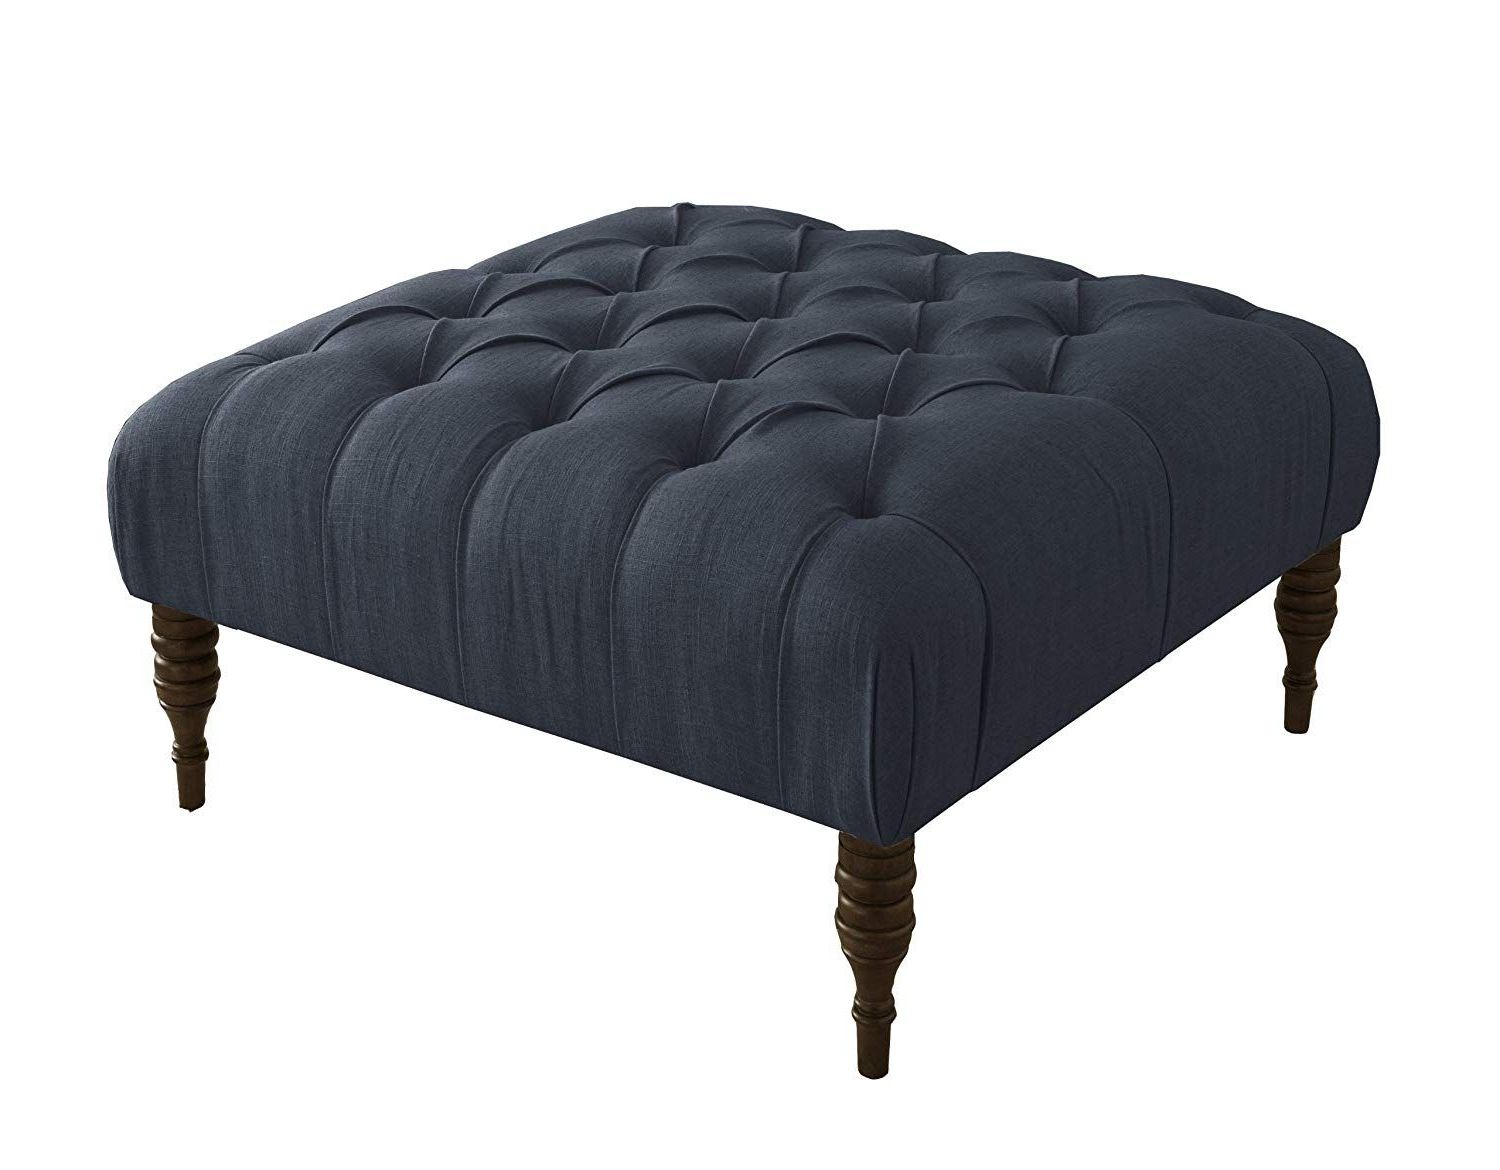 French Linen Black Square Ottomans Inside Most Up To Date Skyline Furniture Tufted Cocktail Ottoman In Linen Navy (View 2 of 10)